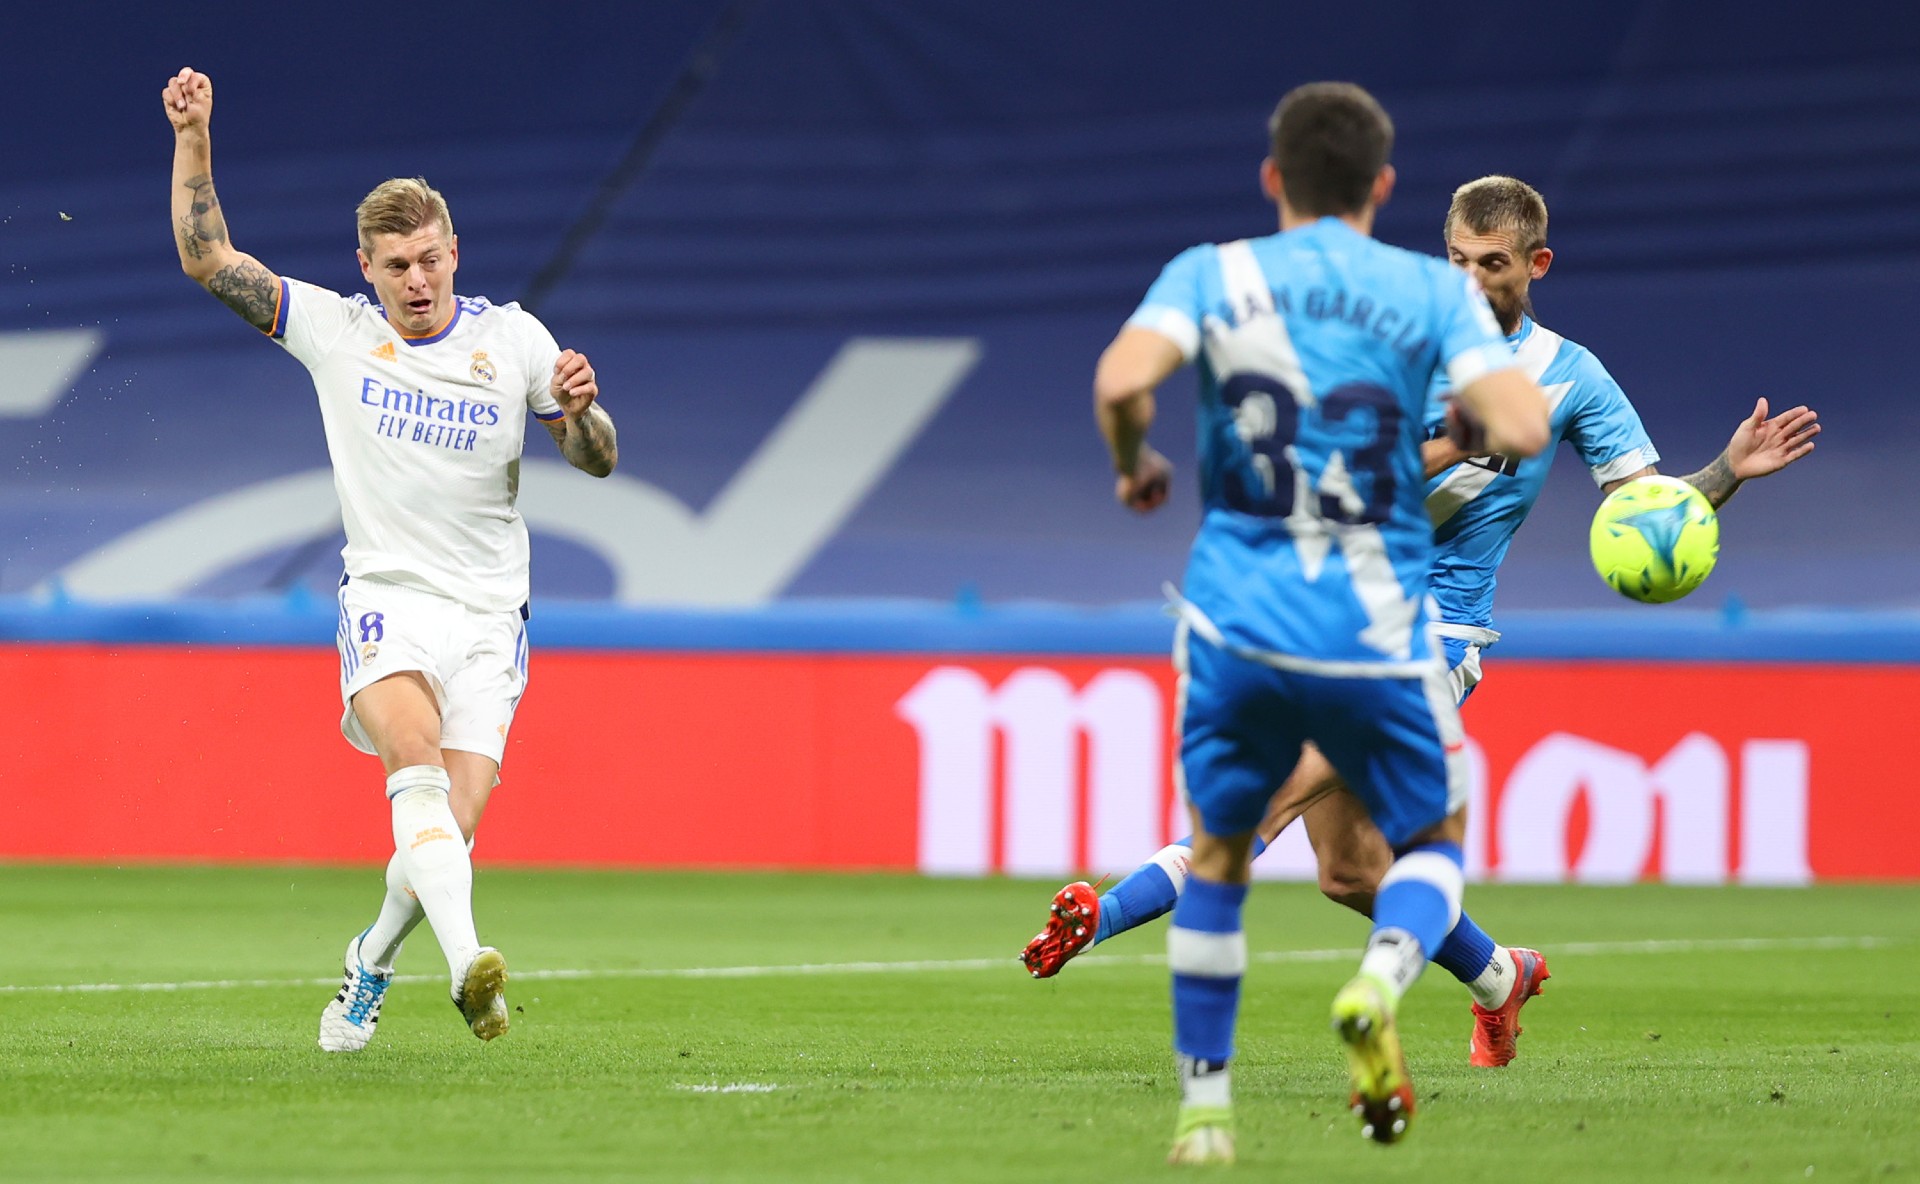 WATCH: Toni Kroos nets his first goal of 2021/22 as Real Madrid lead Rayo Vallecano